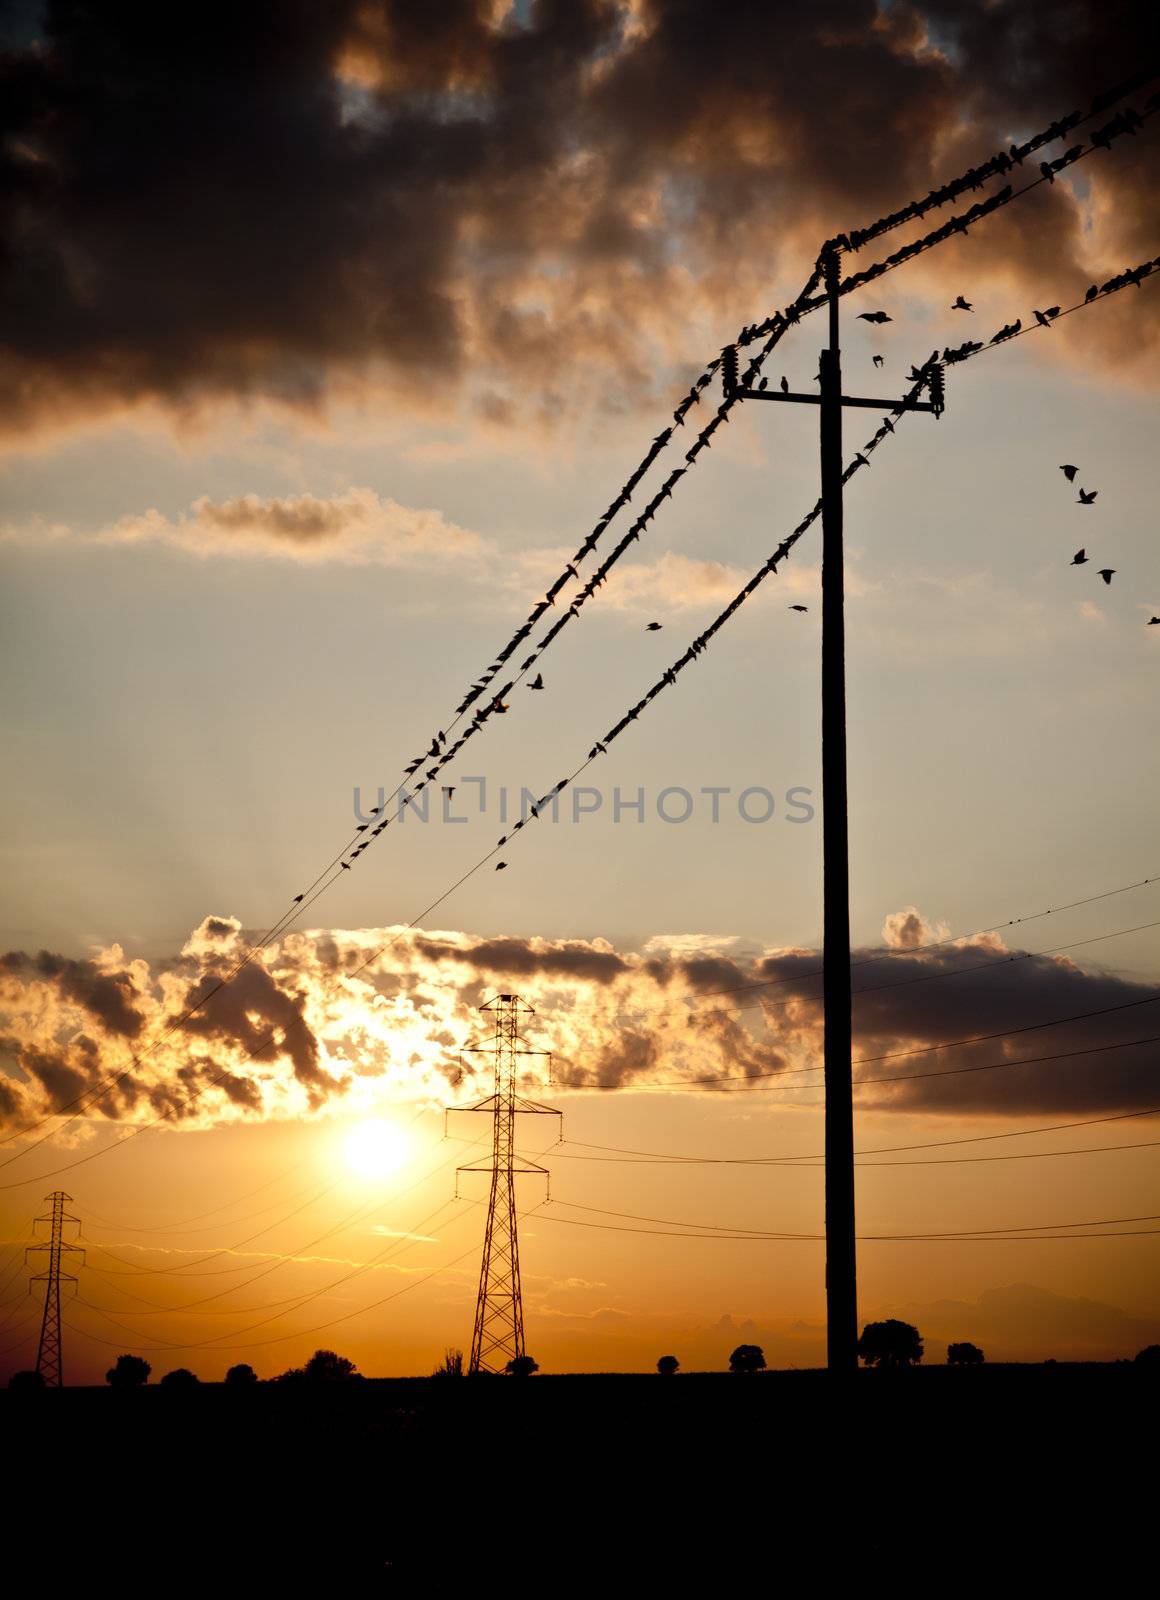 some small birds sitting on high tension wires